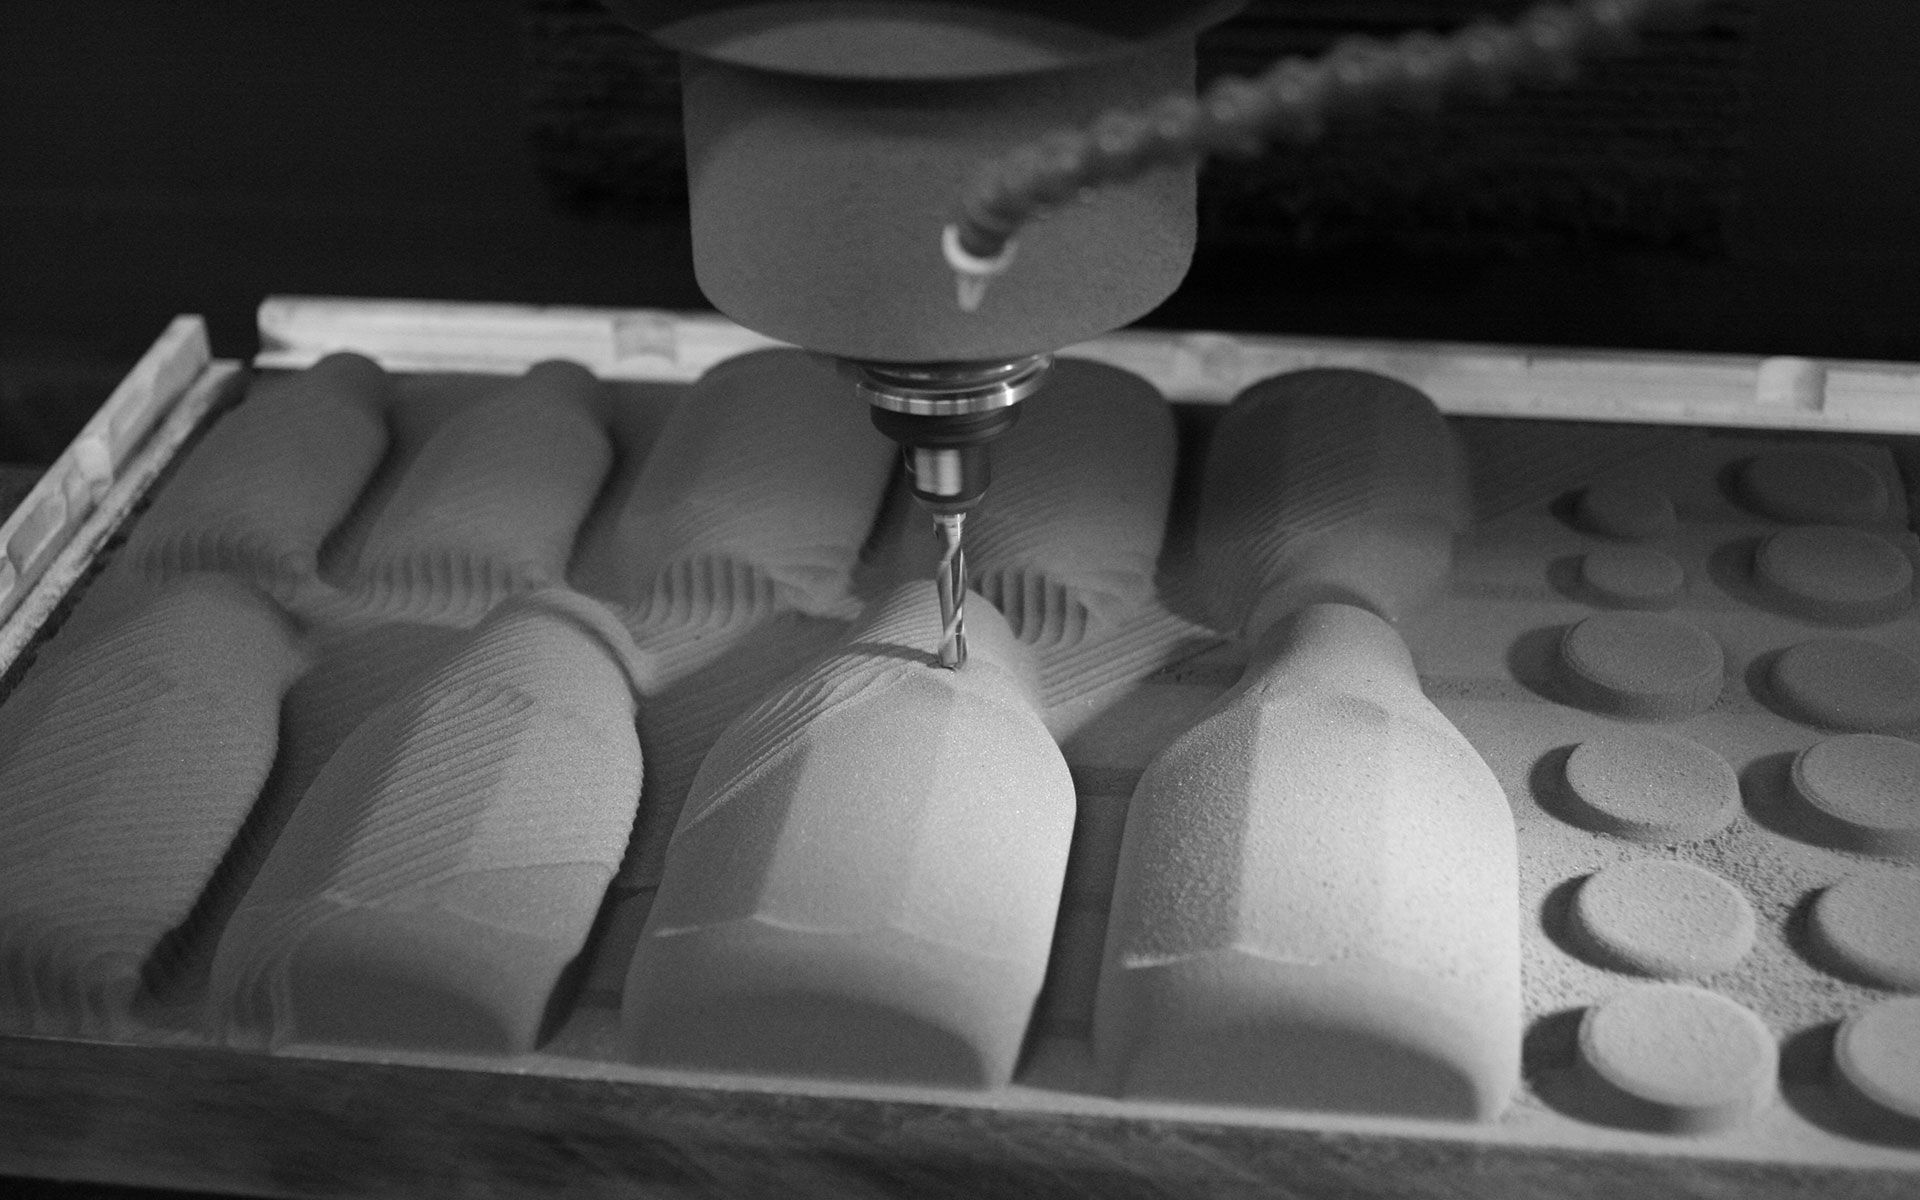 Gray foam material being machined into ketchup bottle forms